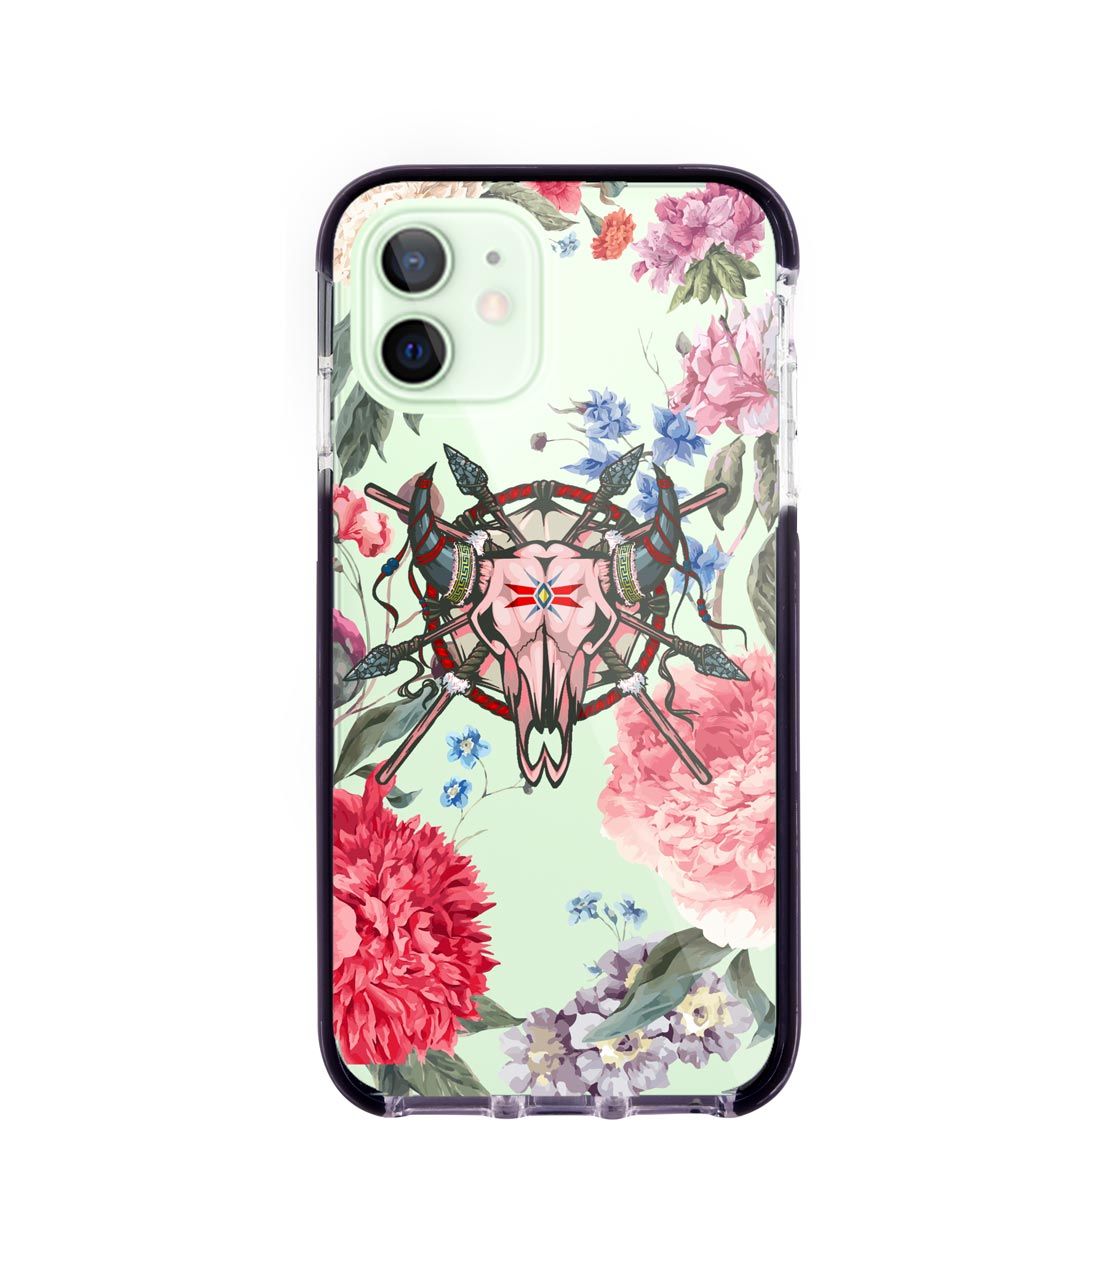 Floral Symmetry - Extreme Case for iPhone 12